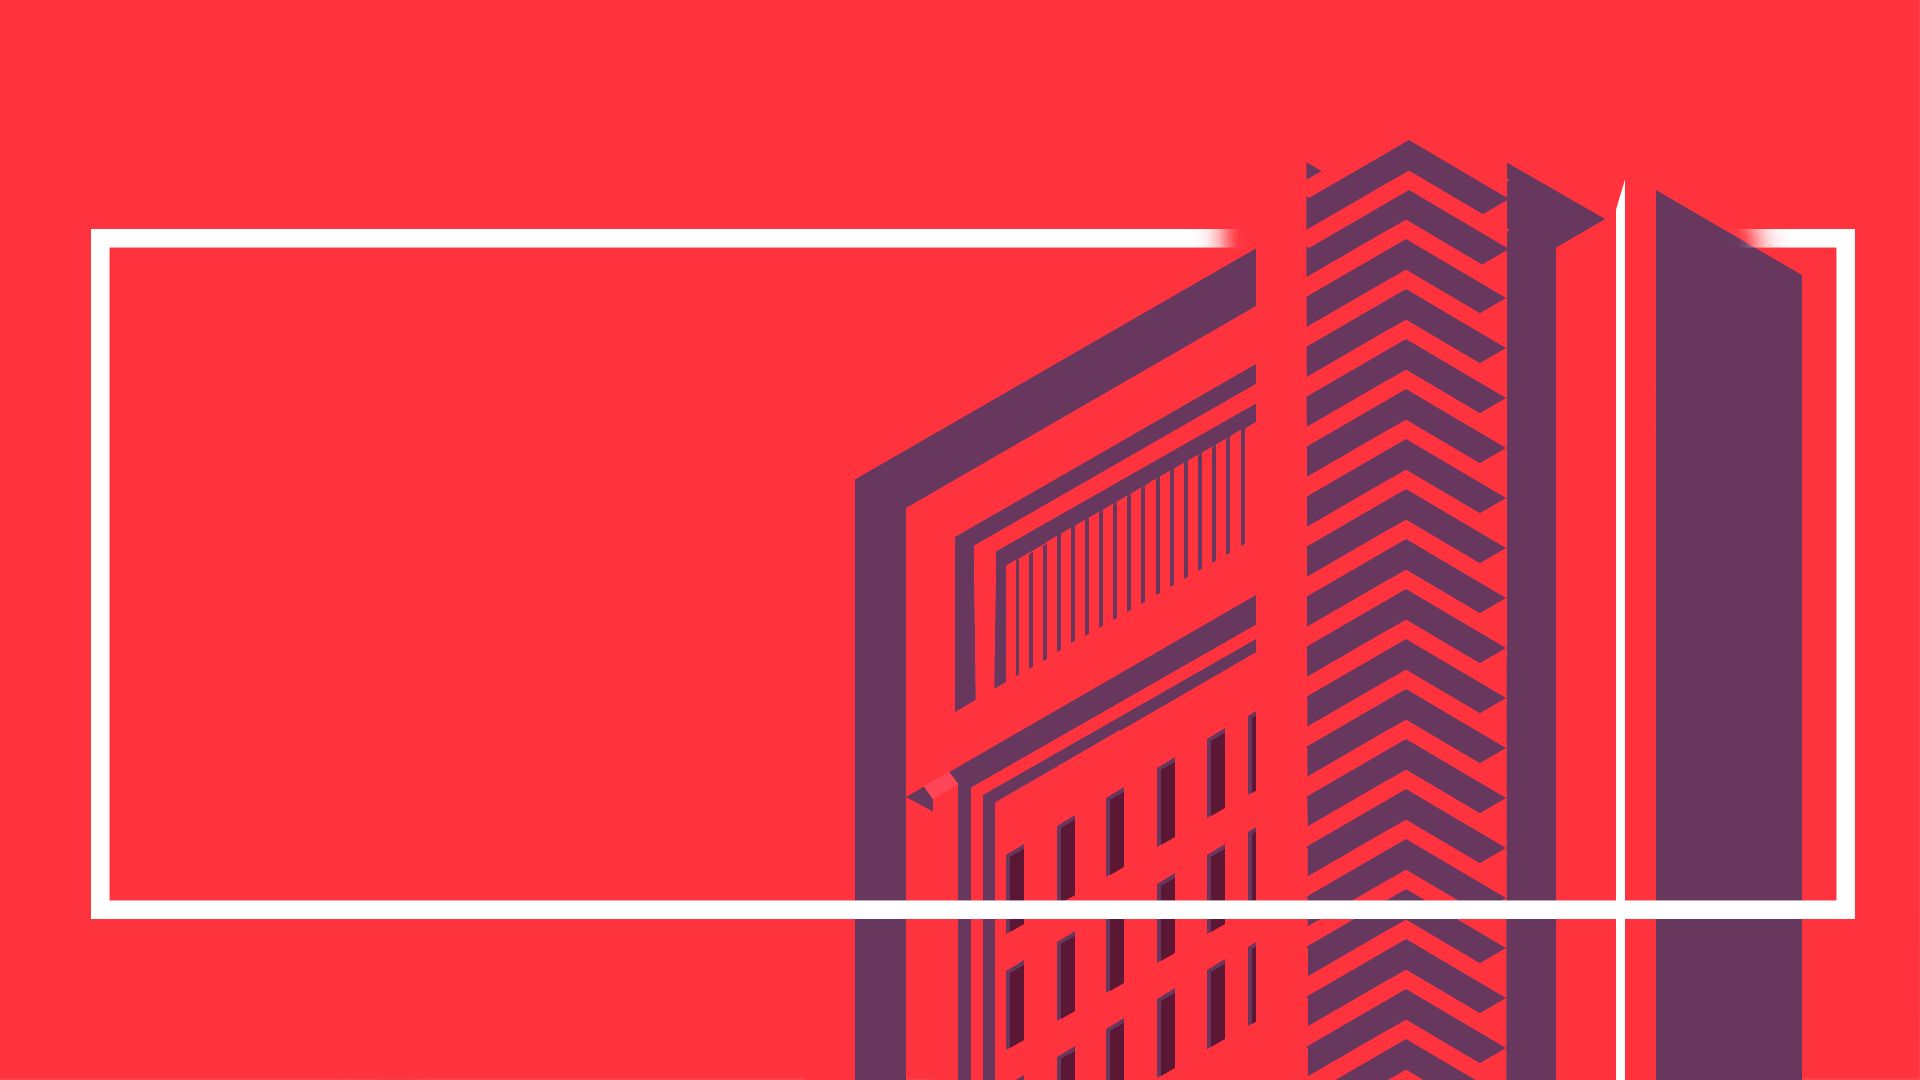 artistic, building, box, red, vector